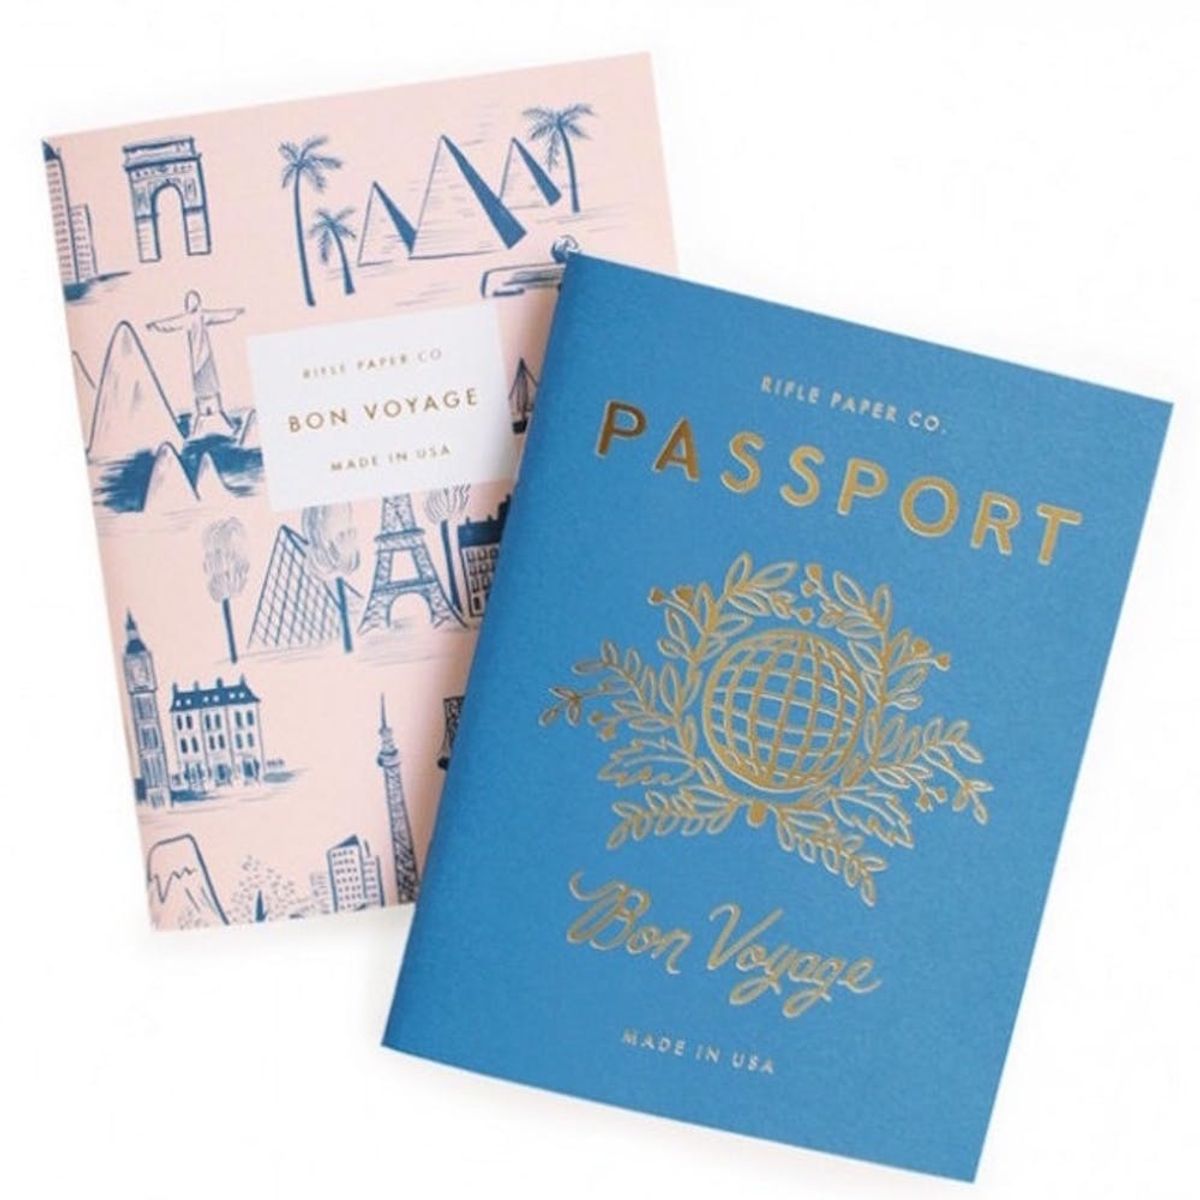 25 Travel Journals You Need for Your Next Adventure